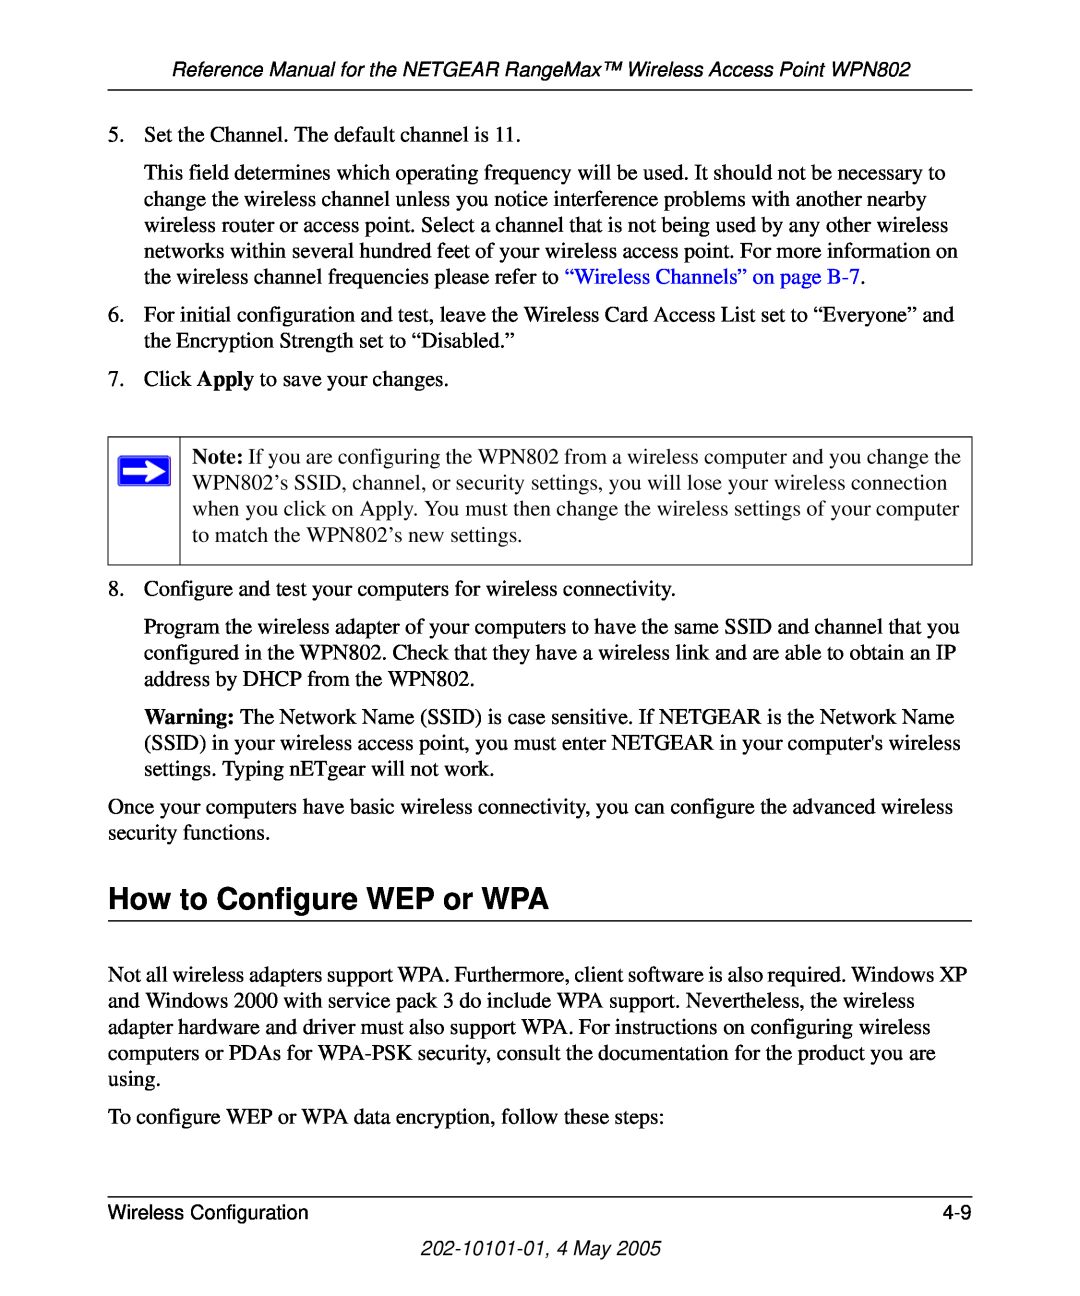 NETGEAR WPN802 manual How to Configure WEP or WPA 